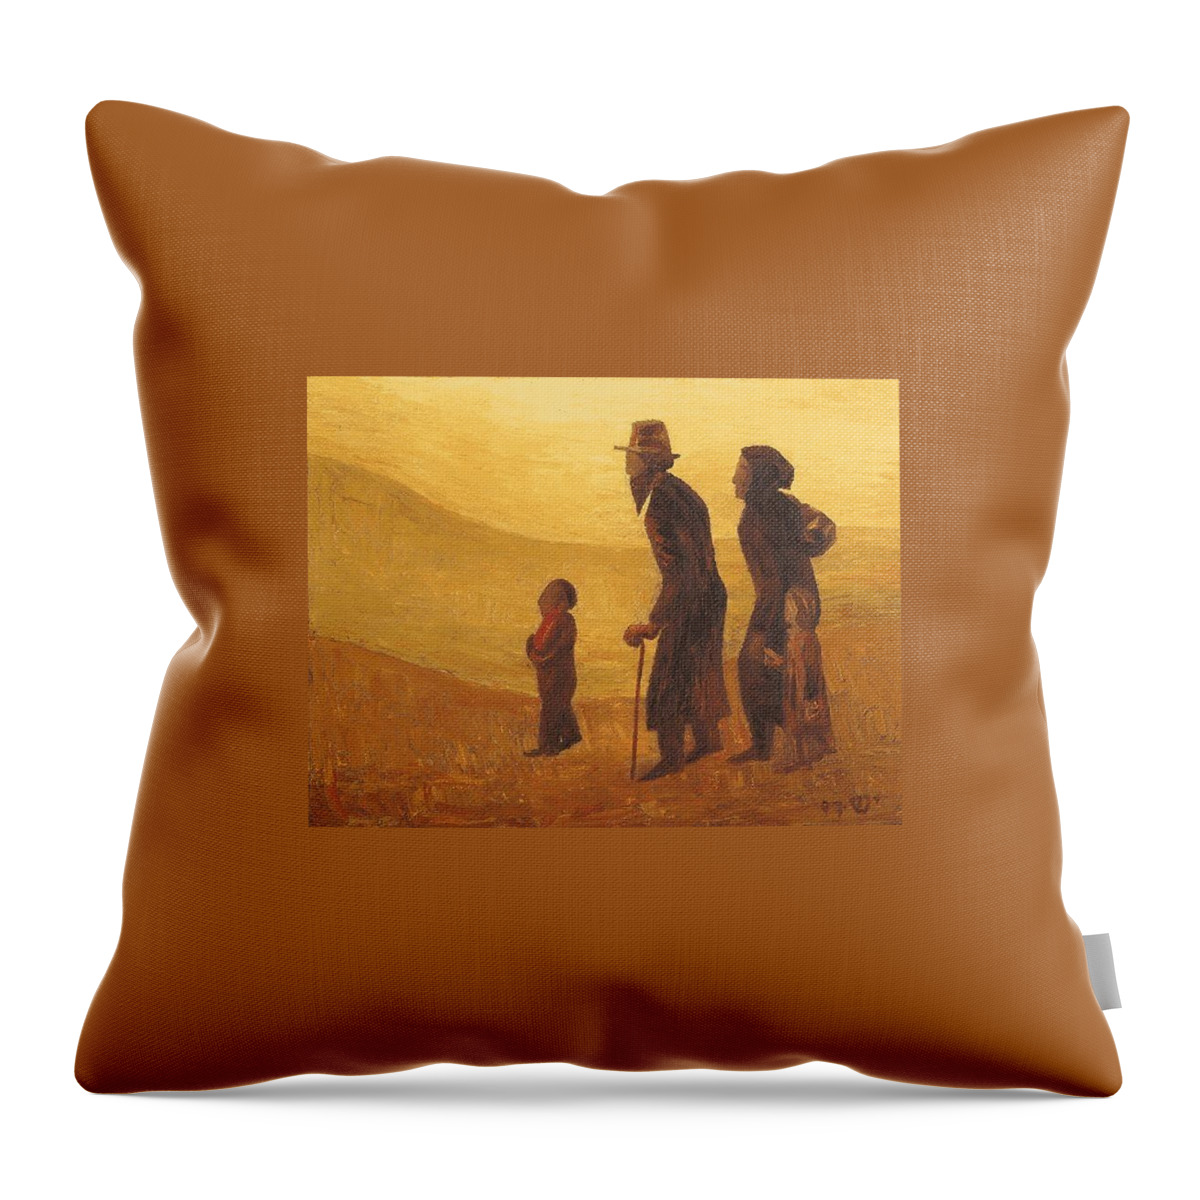 Wholesale Throw Pillow featuring the painting The Way - Aliyah by Israel Tsvaygenbaum